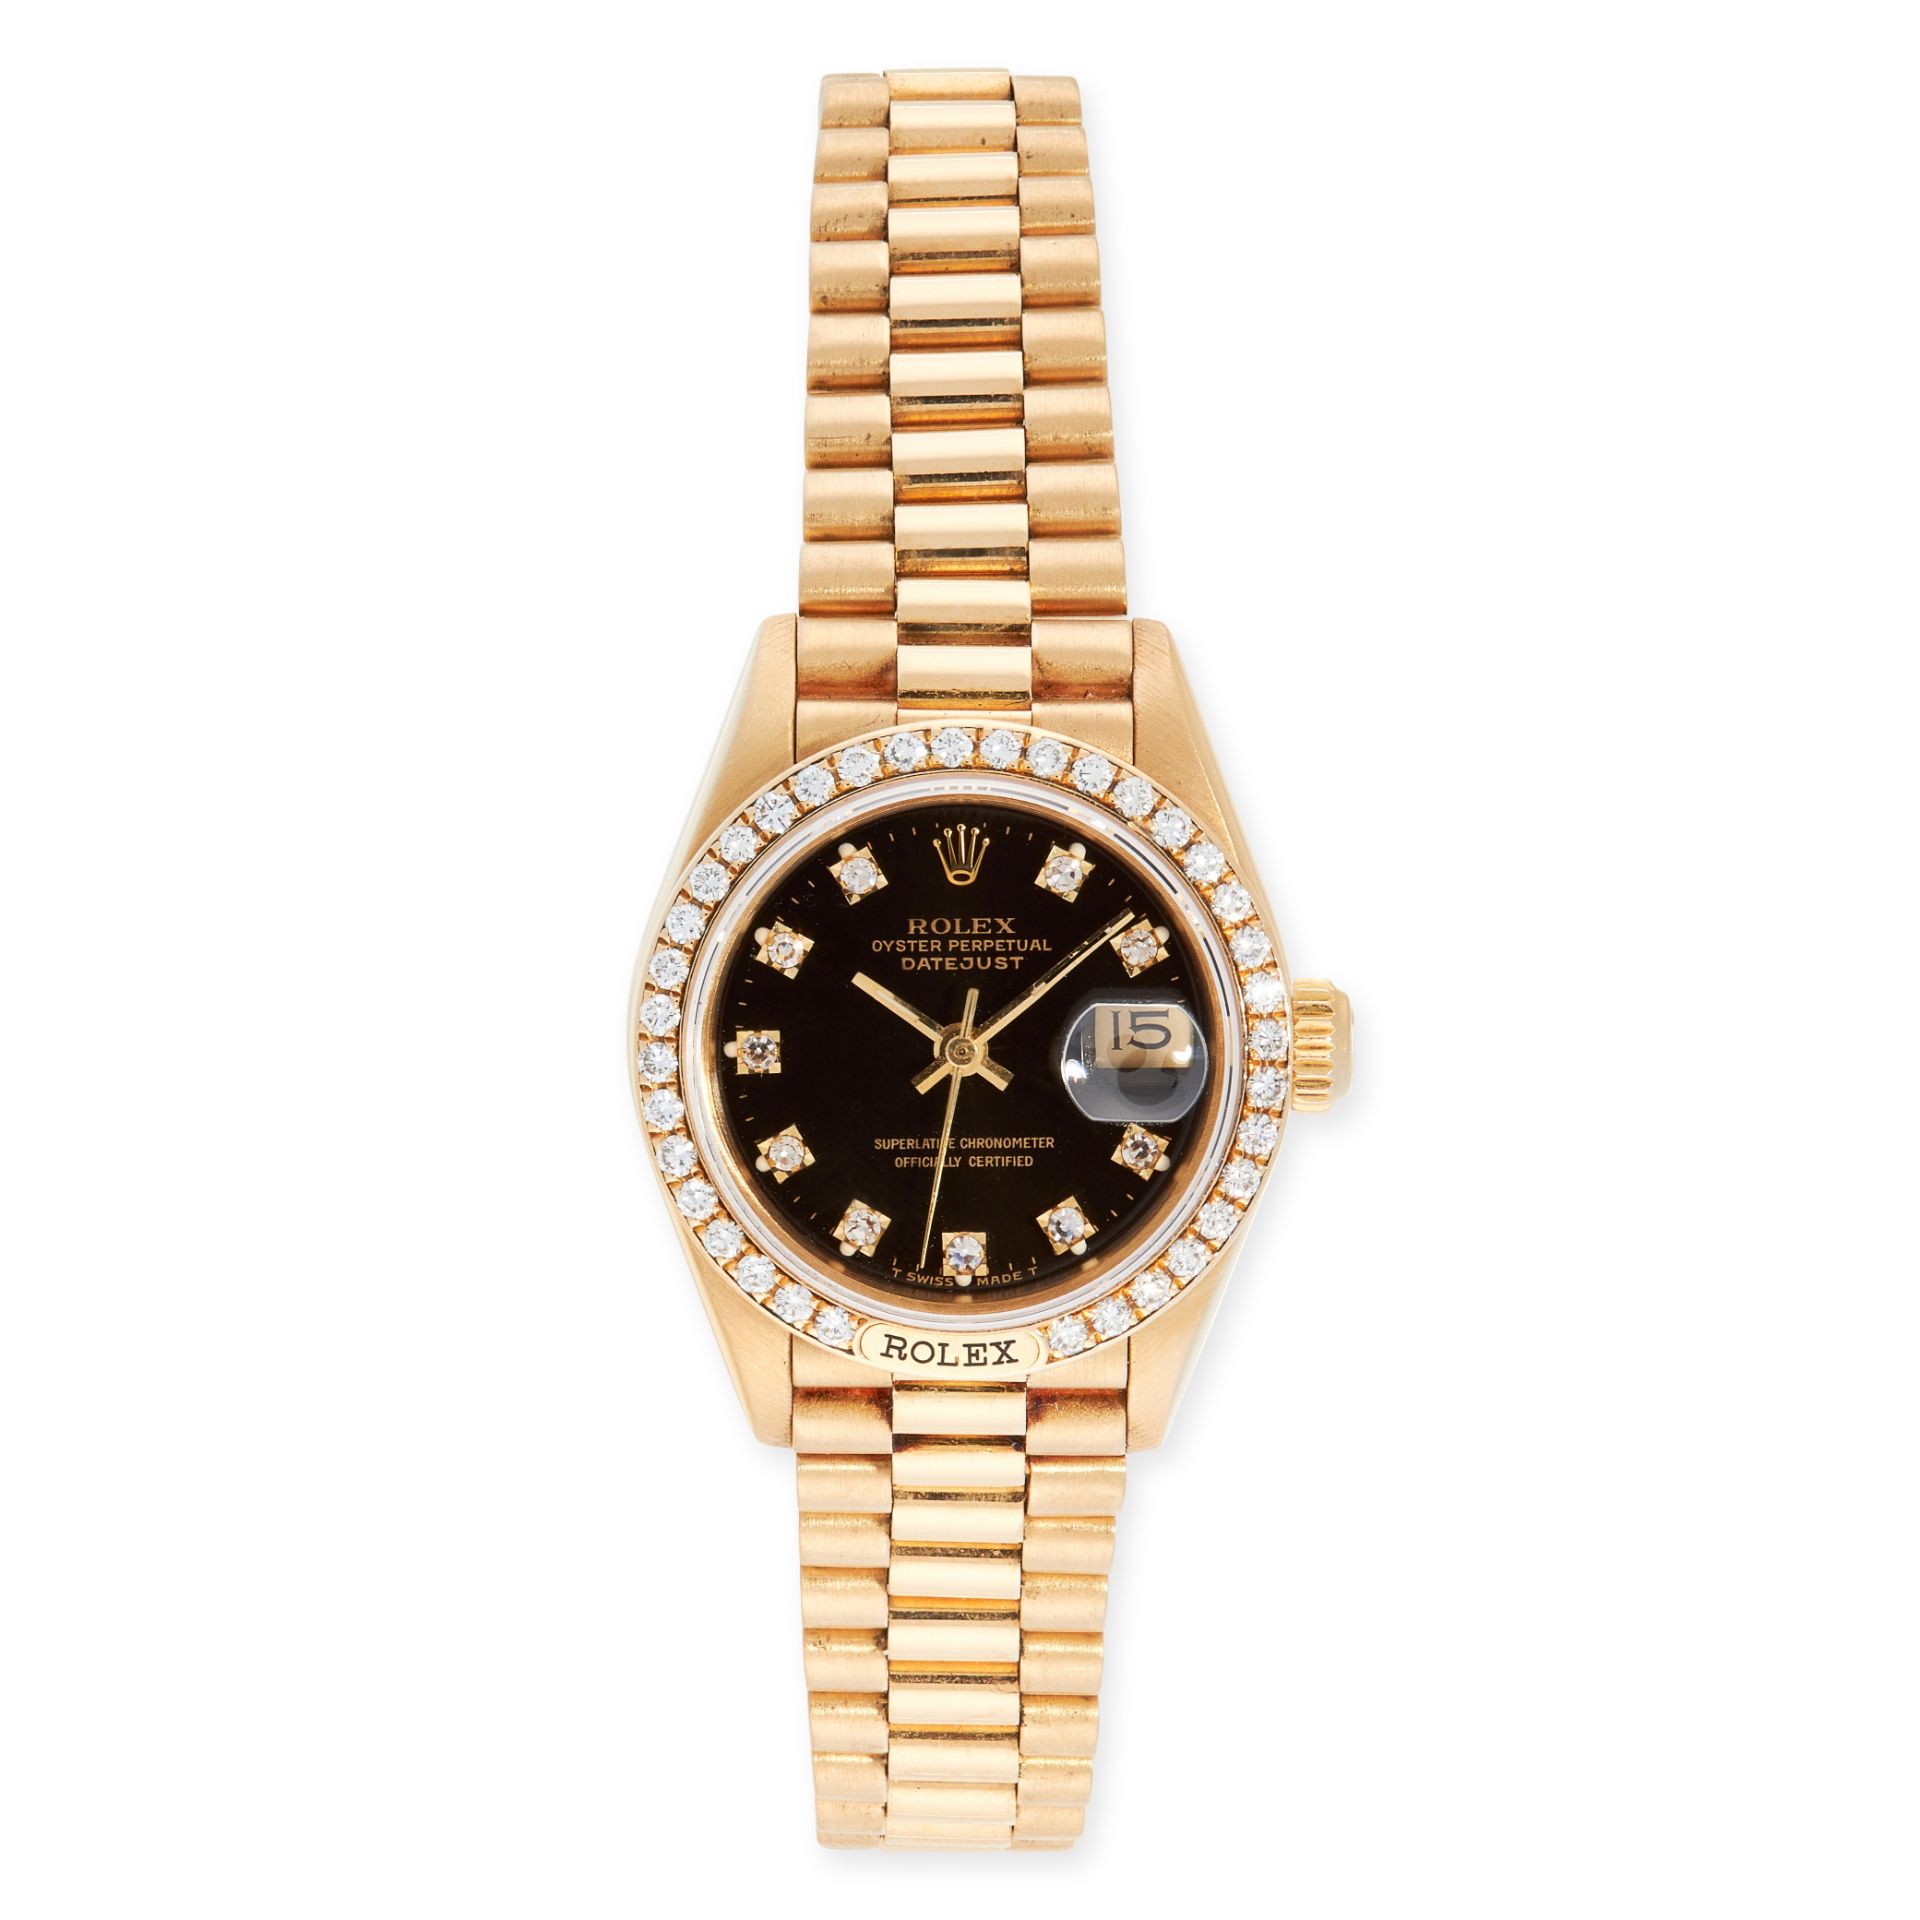 A LADIES OYSTER PERPETUAL DATEJUST DIAMOND WRIST WATCH, ROLEX in 18ct yellow gold, the circular face